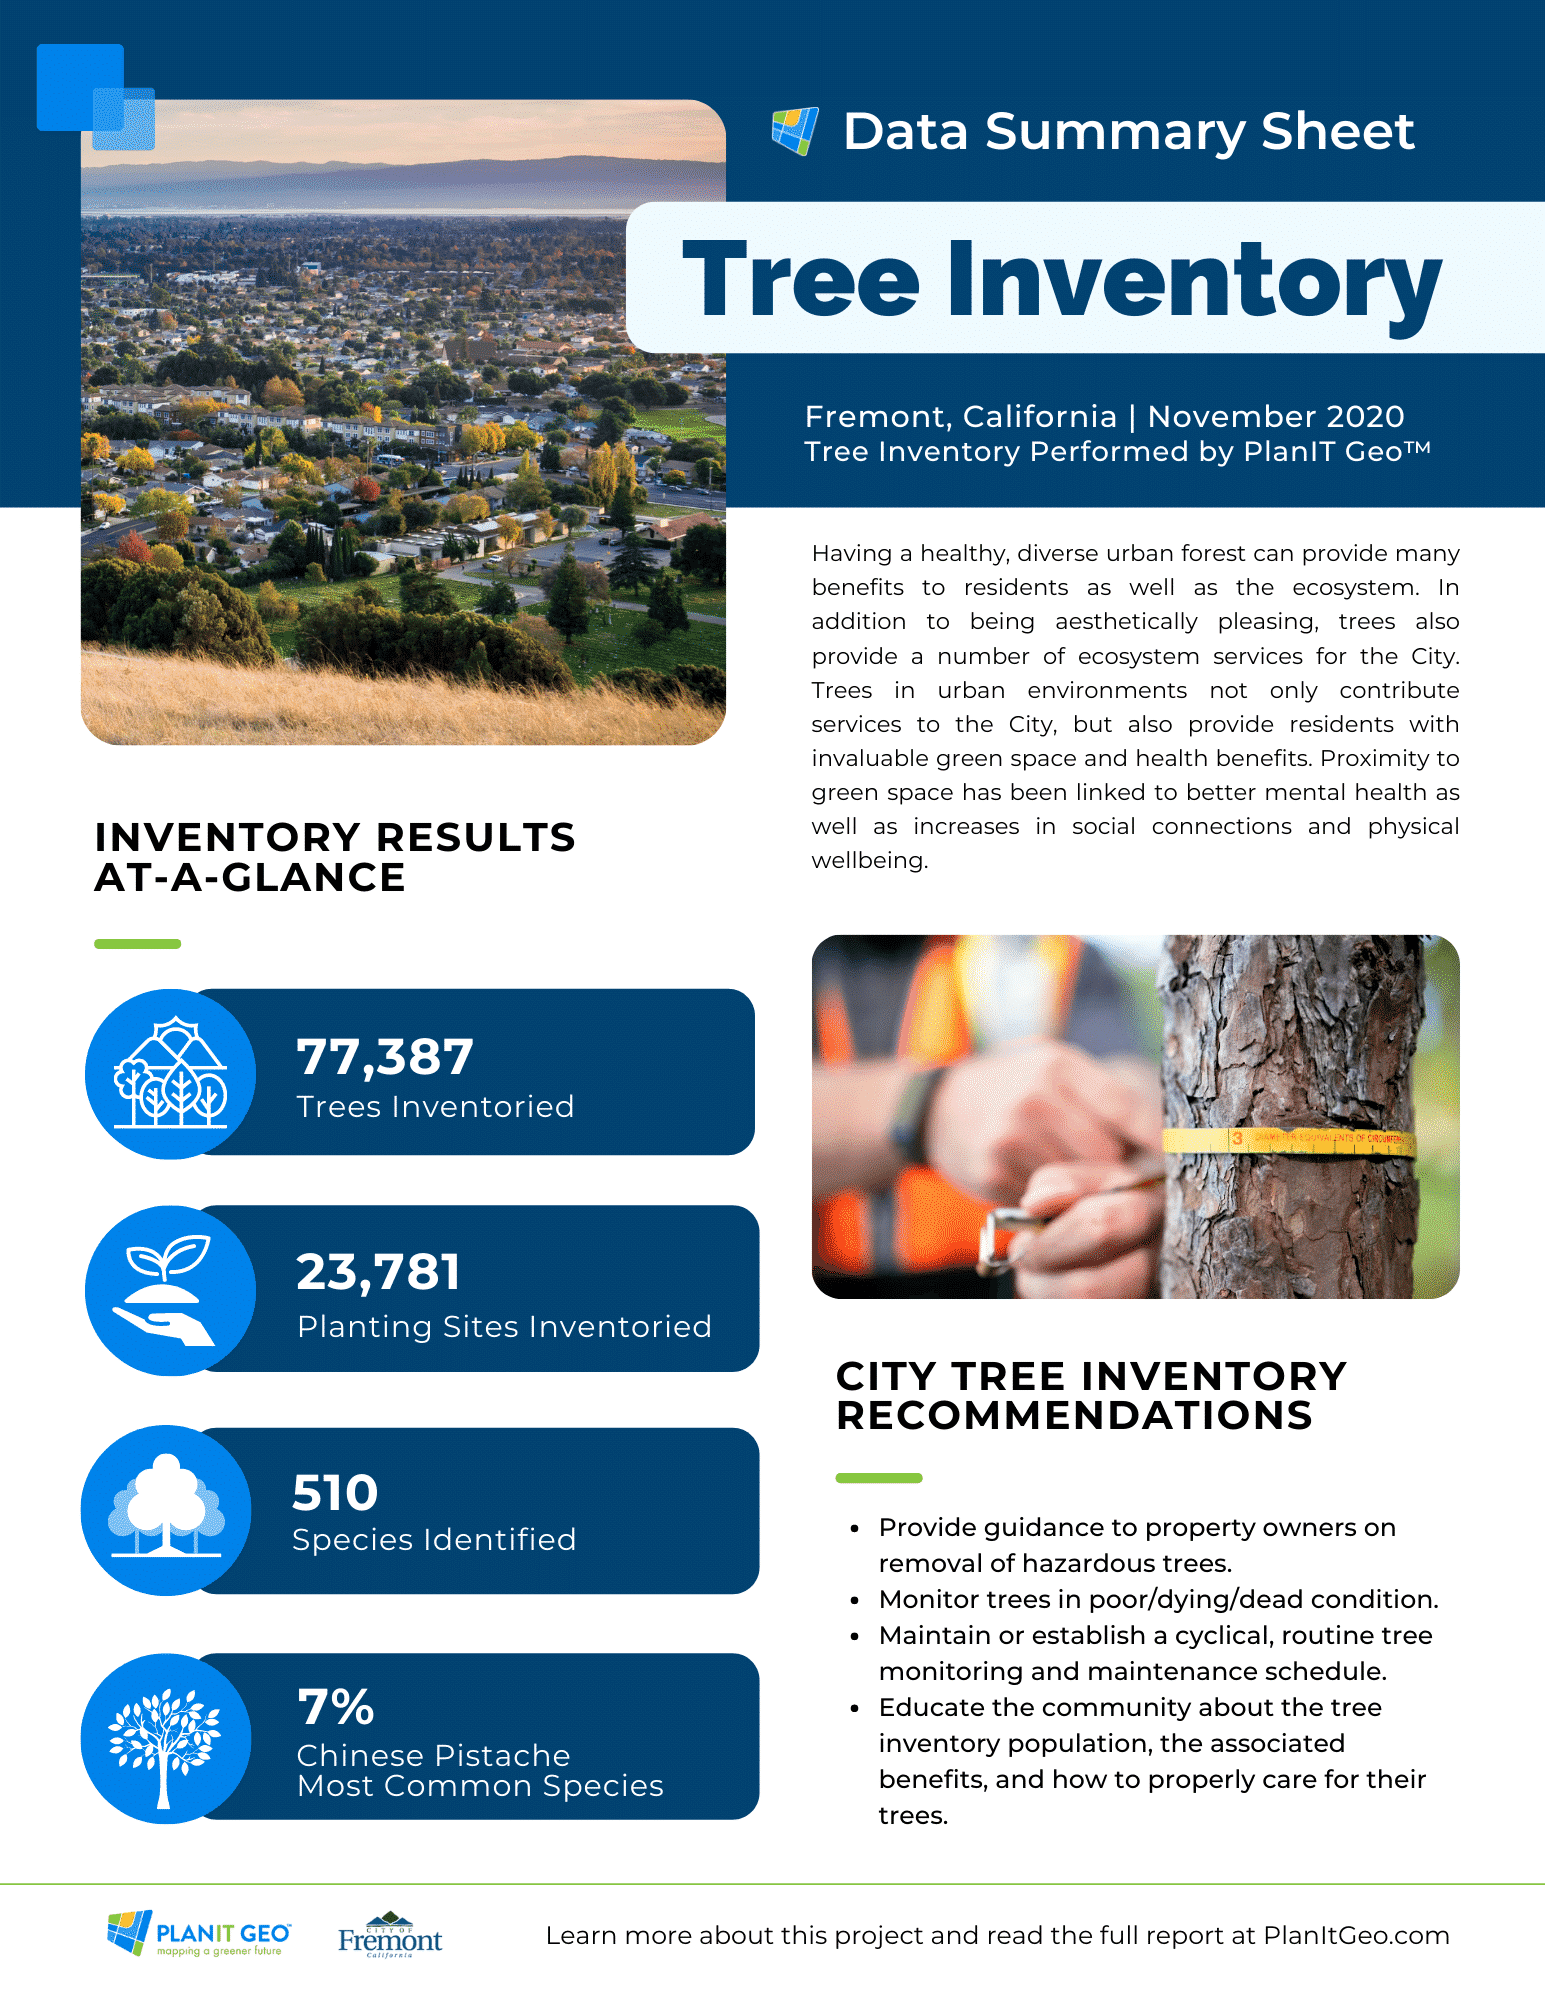 PlanIT Geo's tree inventory and field services team completes tree inventories across the USA